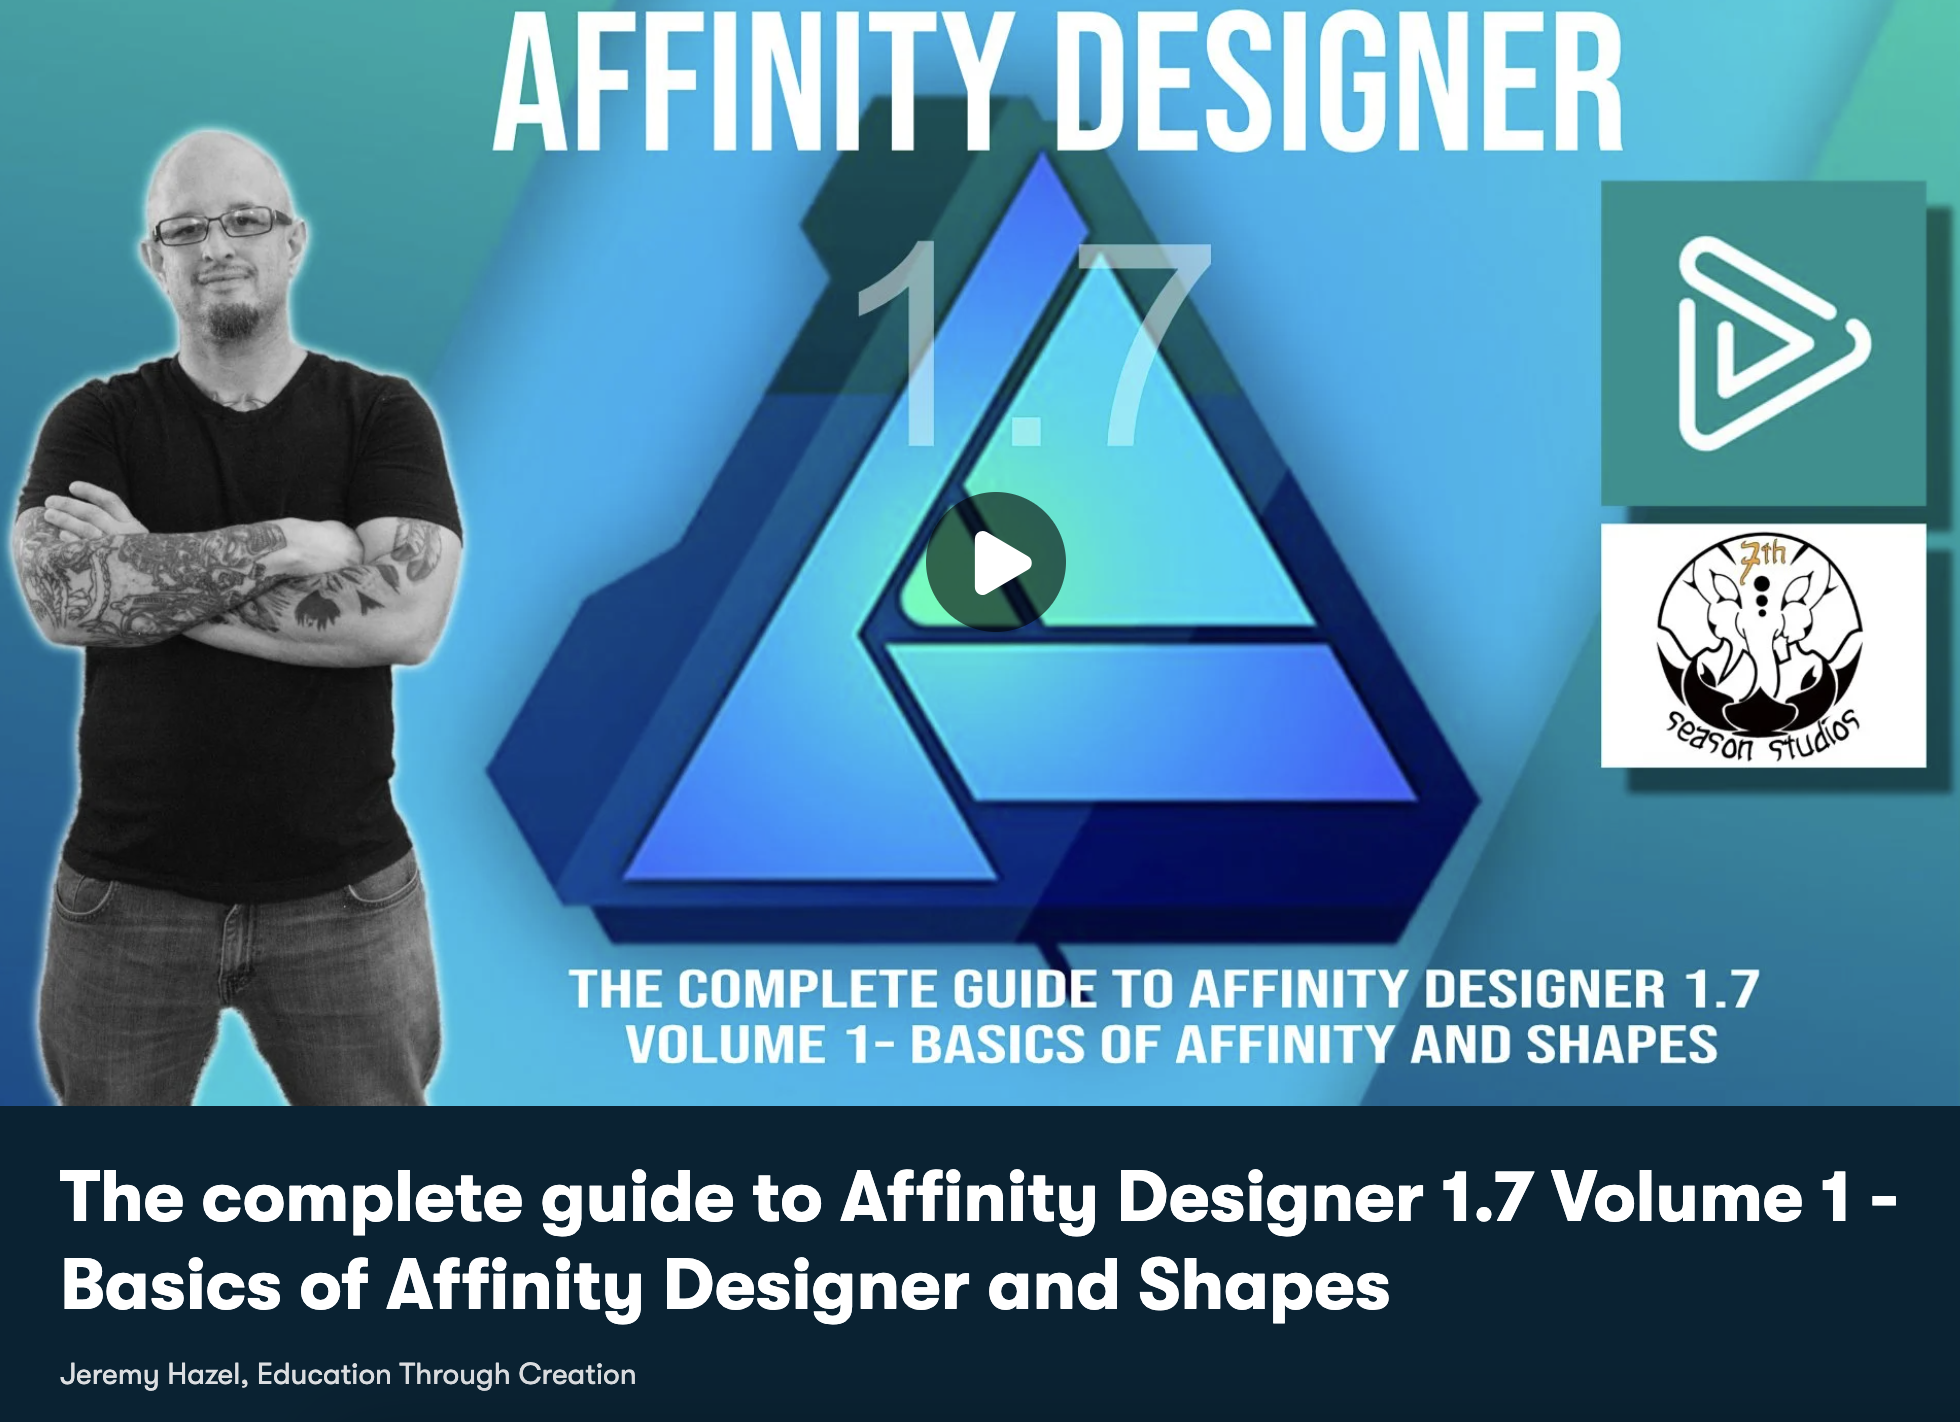 The Complete Guide to Affinity Designer 1.7